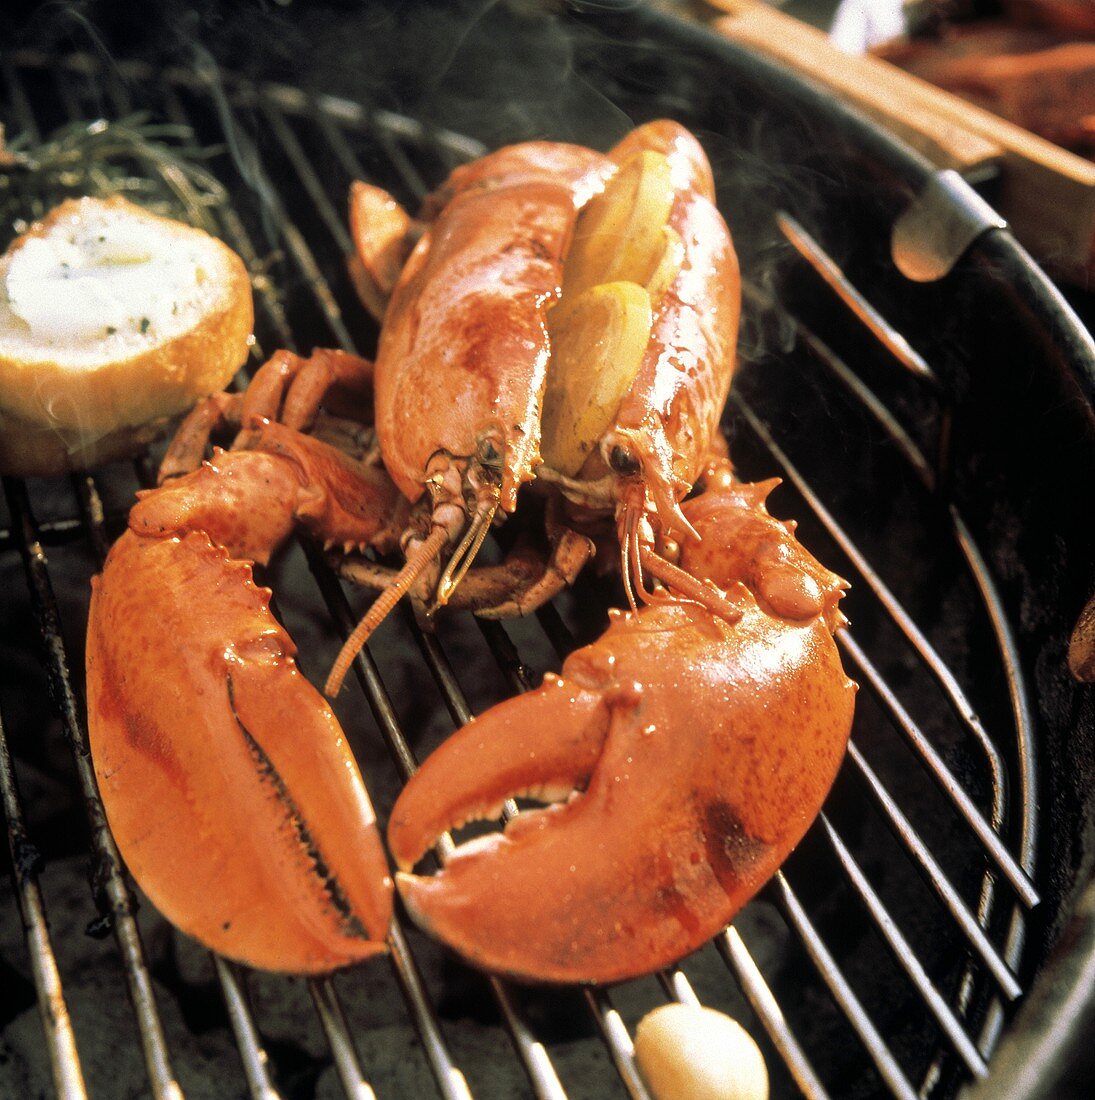 Lobster on the Grill with Lemon Slices